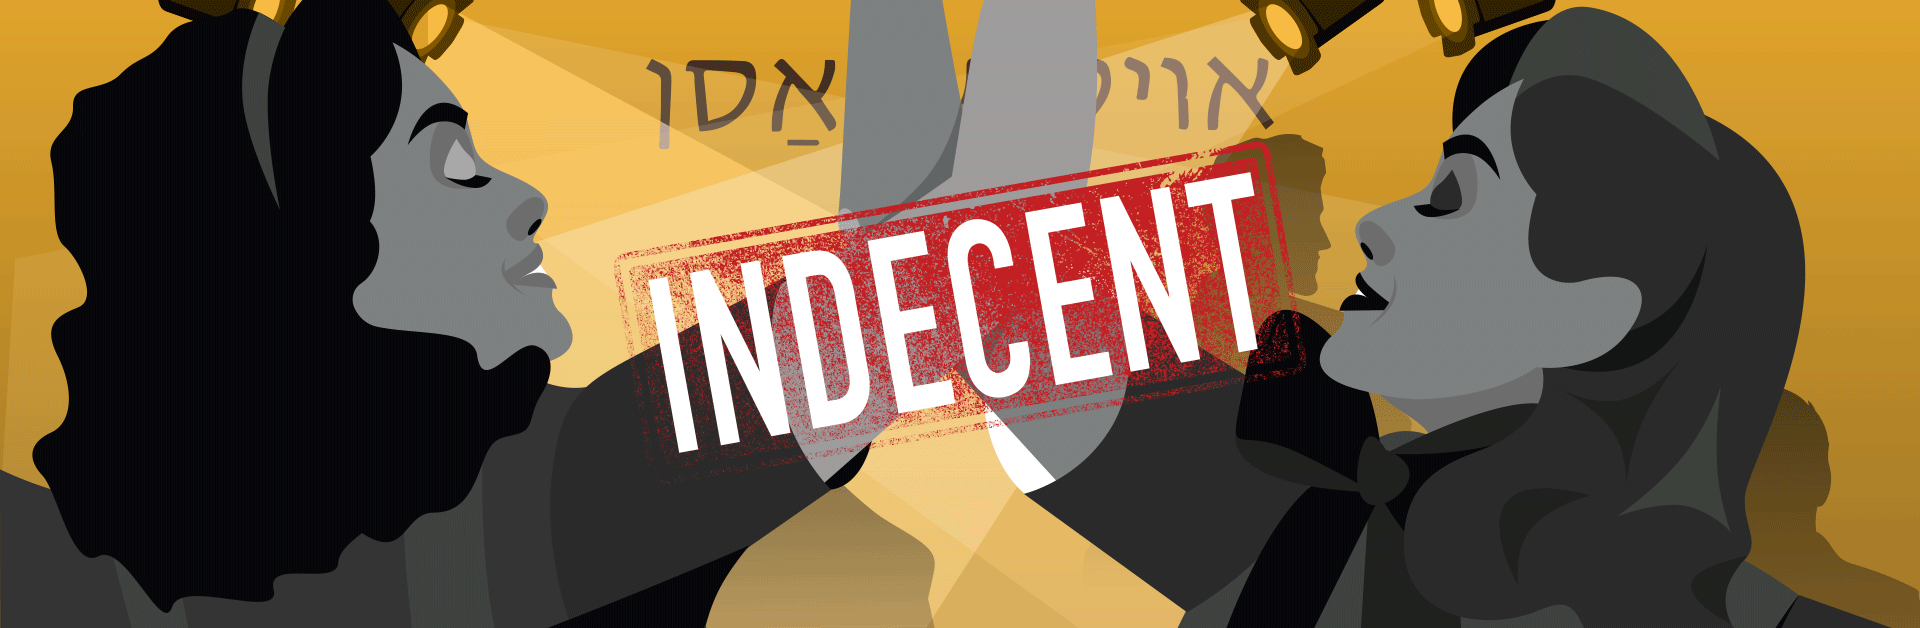 Indecent | A Note from the Artistic Director